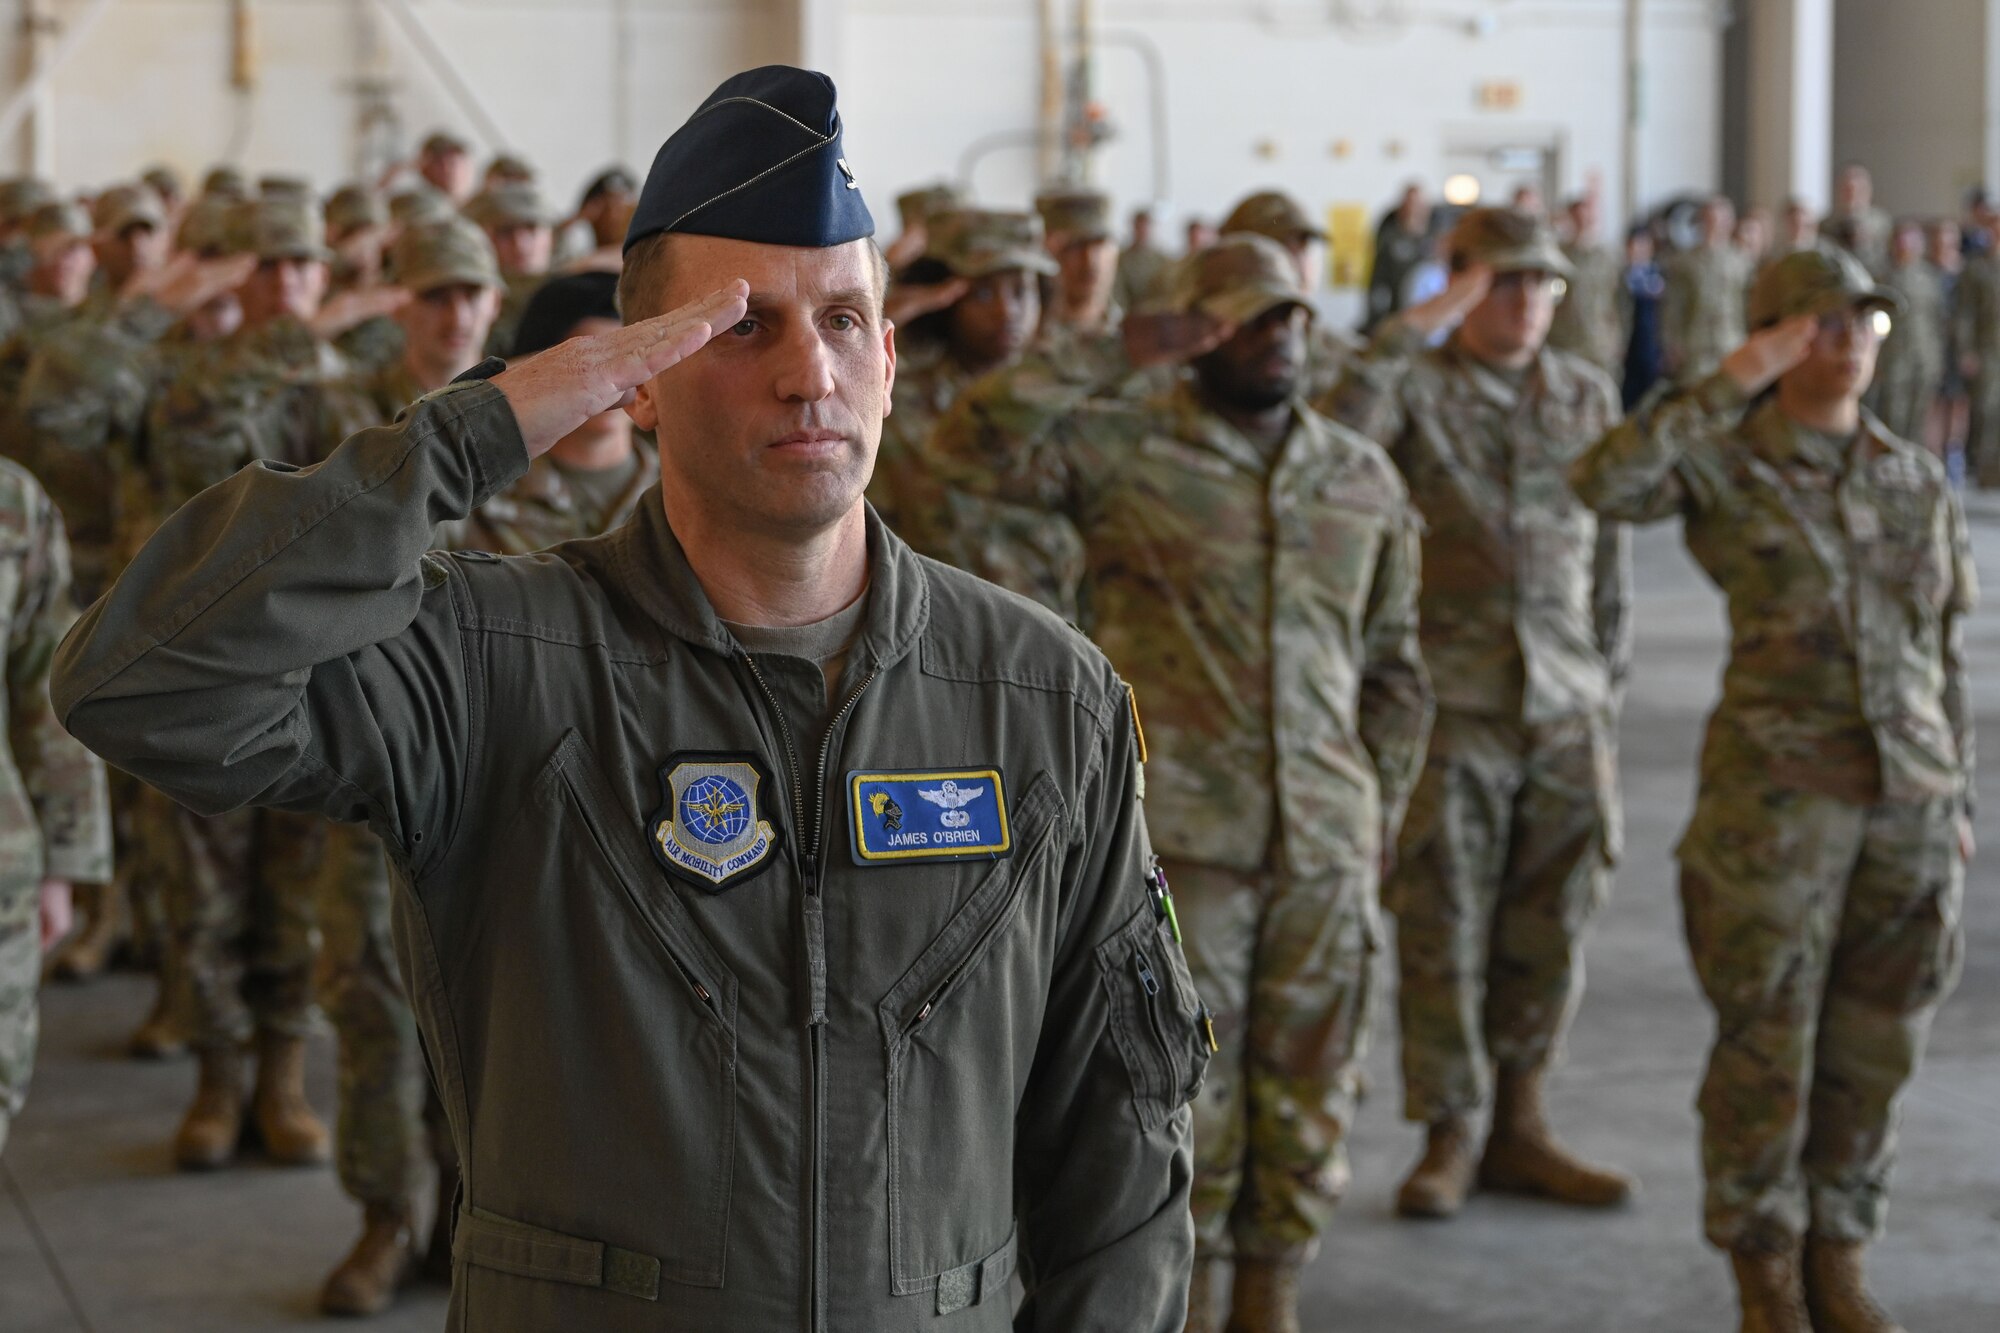 Airmen from the 19th Airlift Wing participate in a change of command ceremony in an airplane hangar